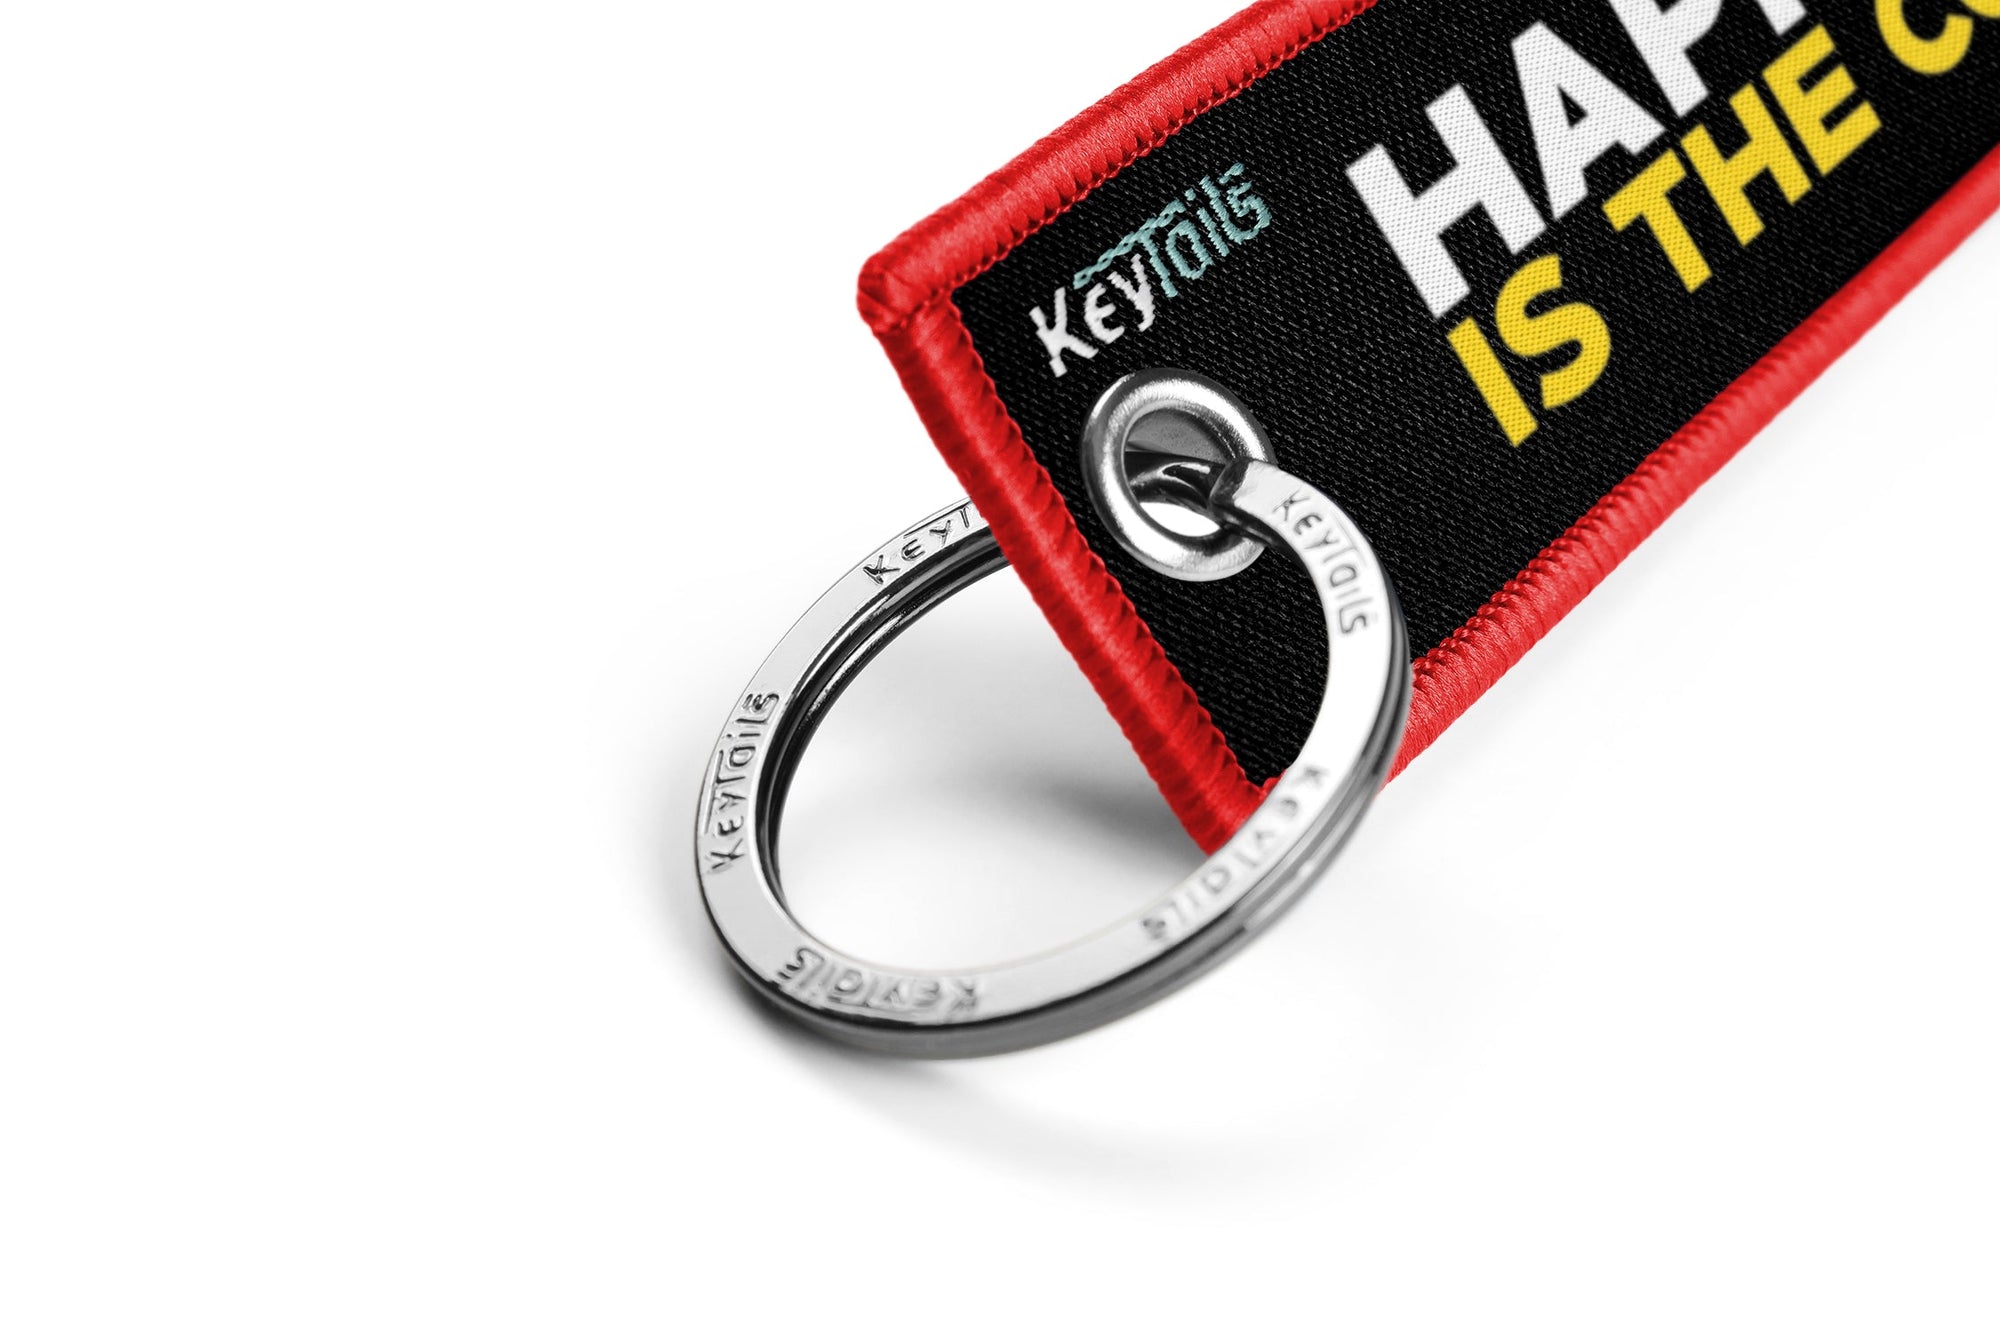 Happiness Is The Corner Keychain, Key Tag - Red